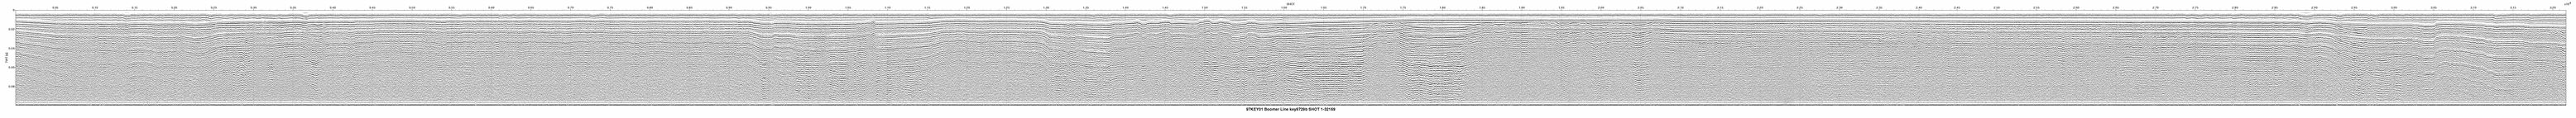 Thumbnail GIF image of the seismic trackline key9729b, with a hotlink to the more detailed, larger JPG image.